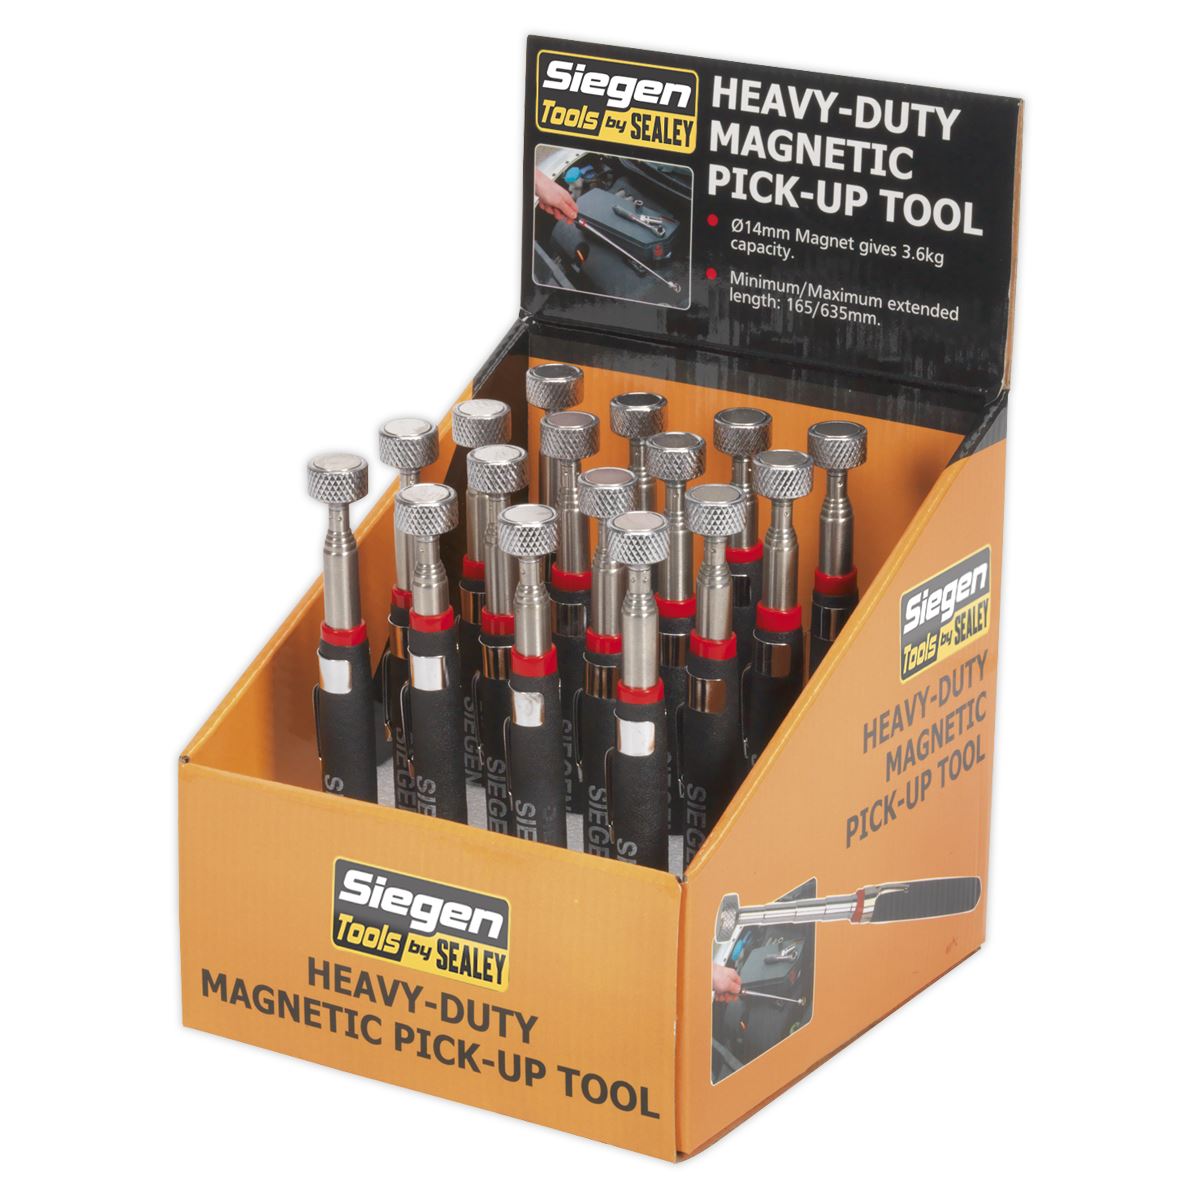 Siegen by Sealey Heavy-Duty Magnetic Pick-Up Tool 3.6kg Capacity Display Box of 16